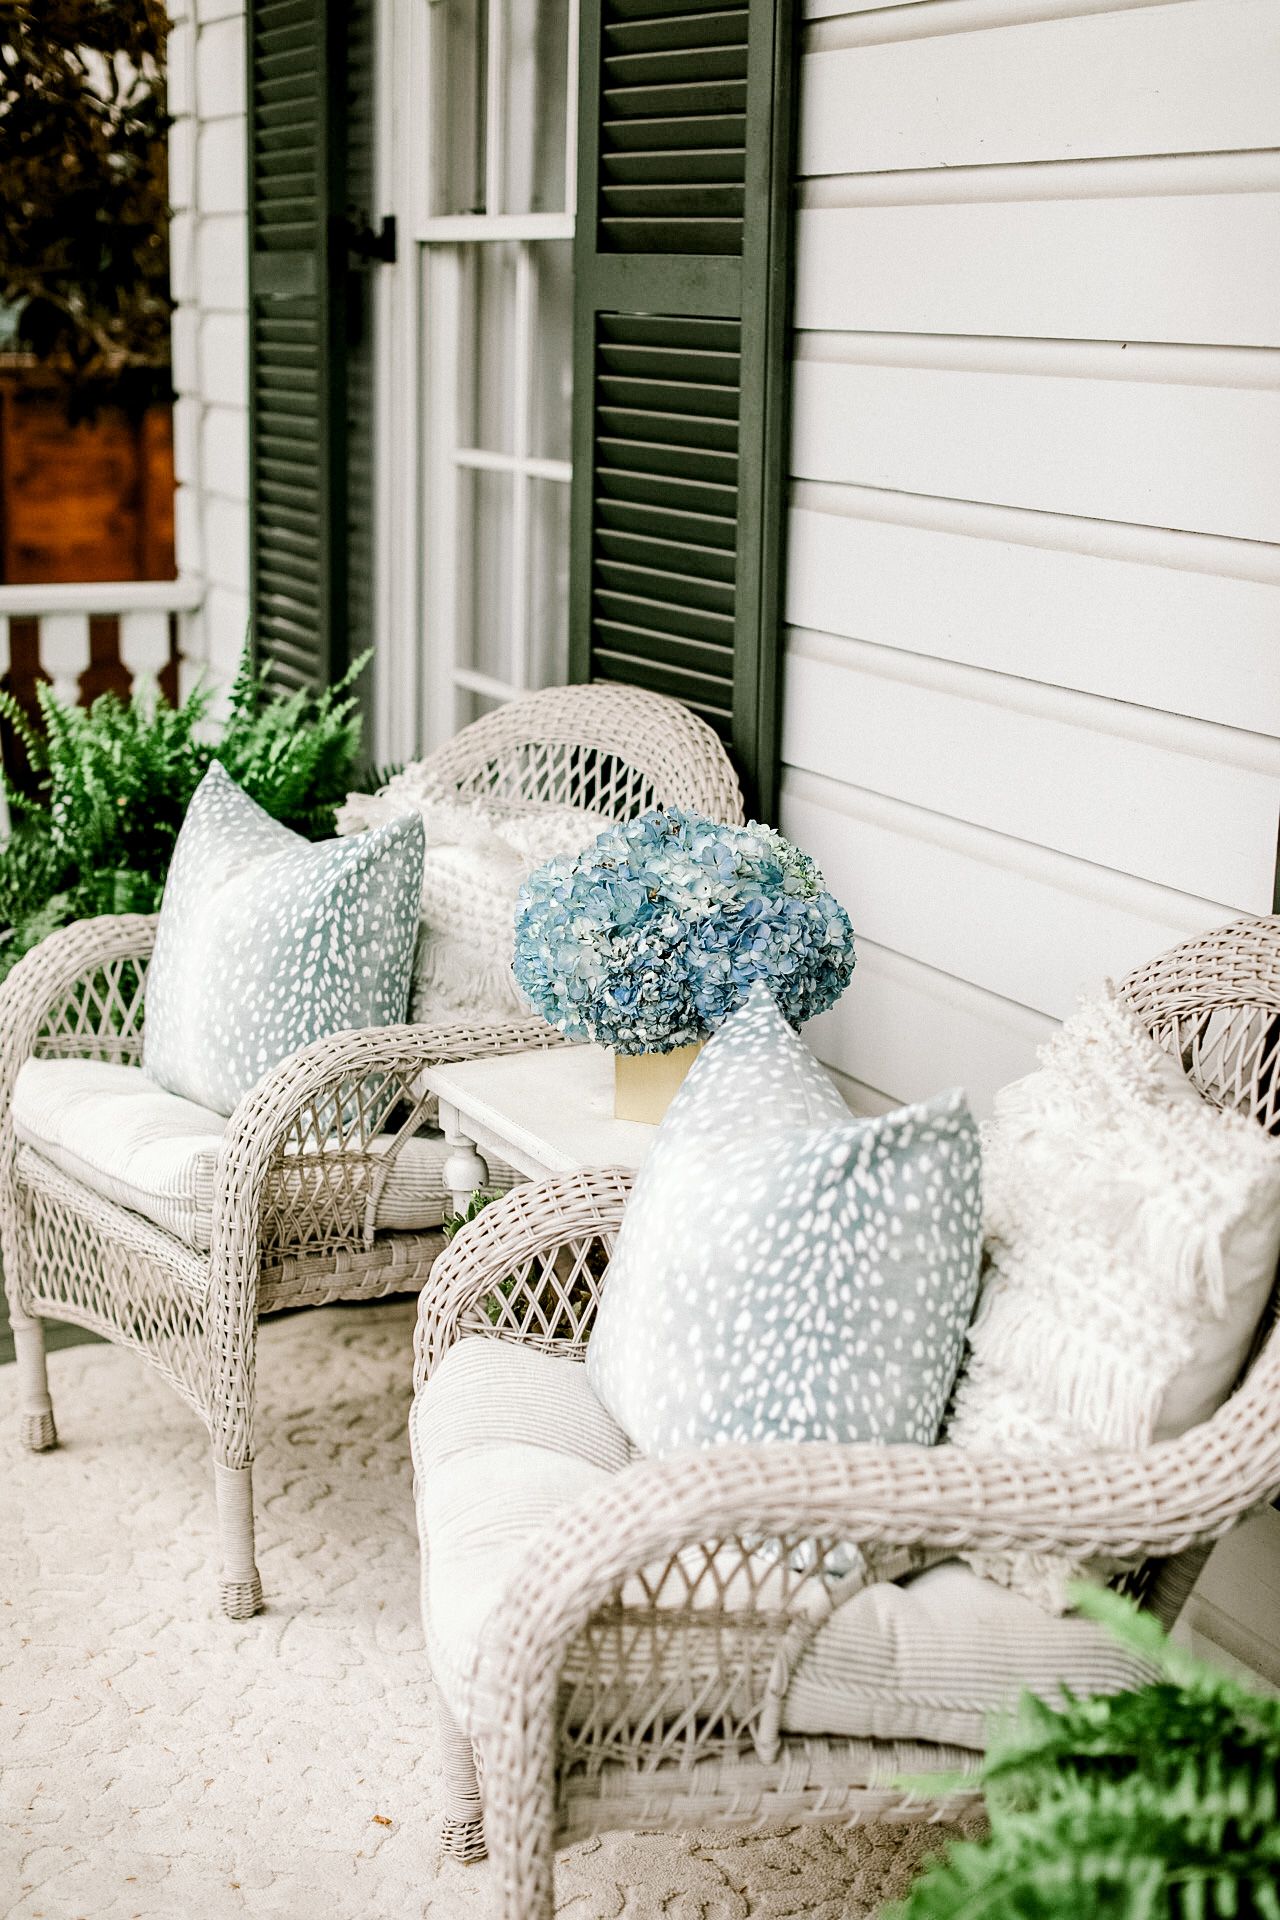 Enhance Your Outdoor Space with Stylish
Wicker Chairs